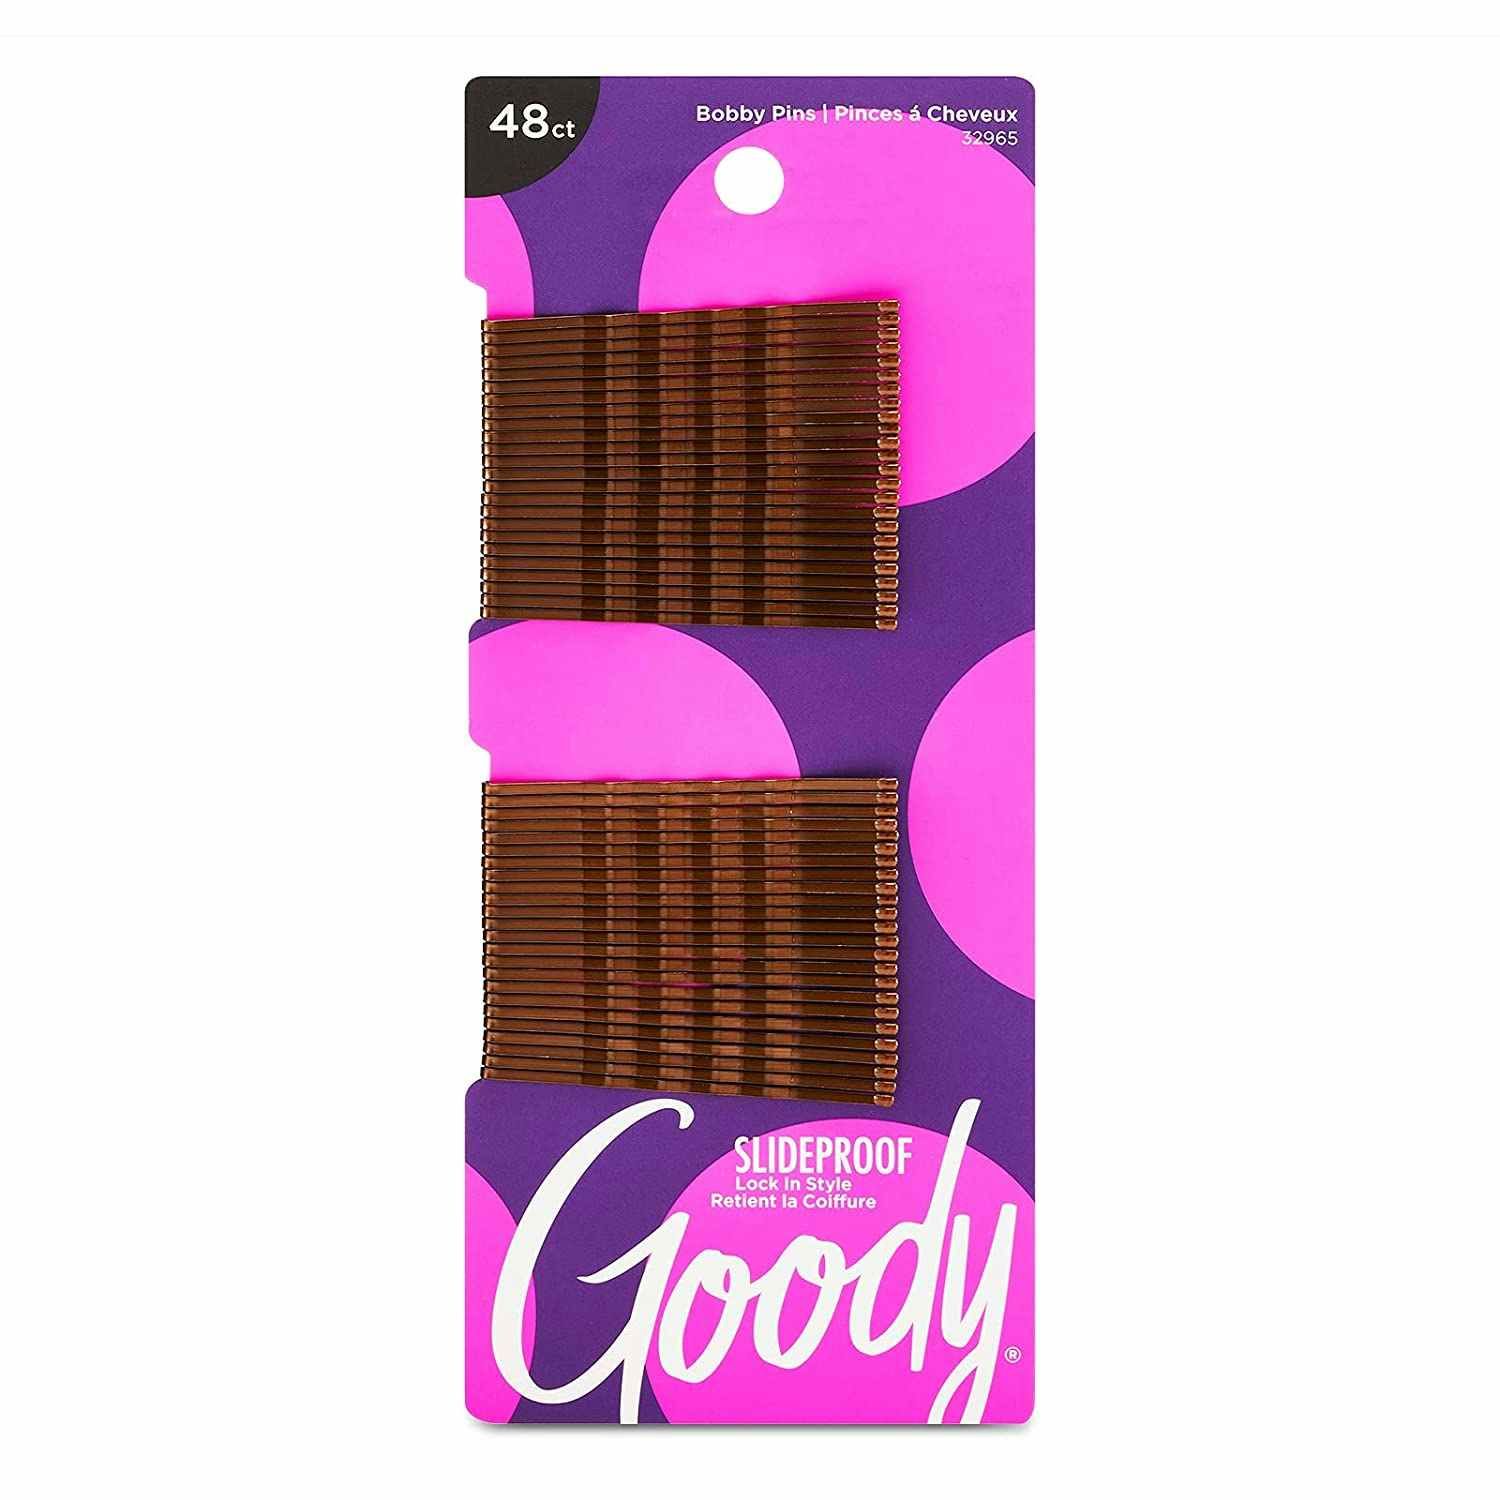 A 48-count pack of brown Goody bobby pins.